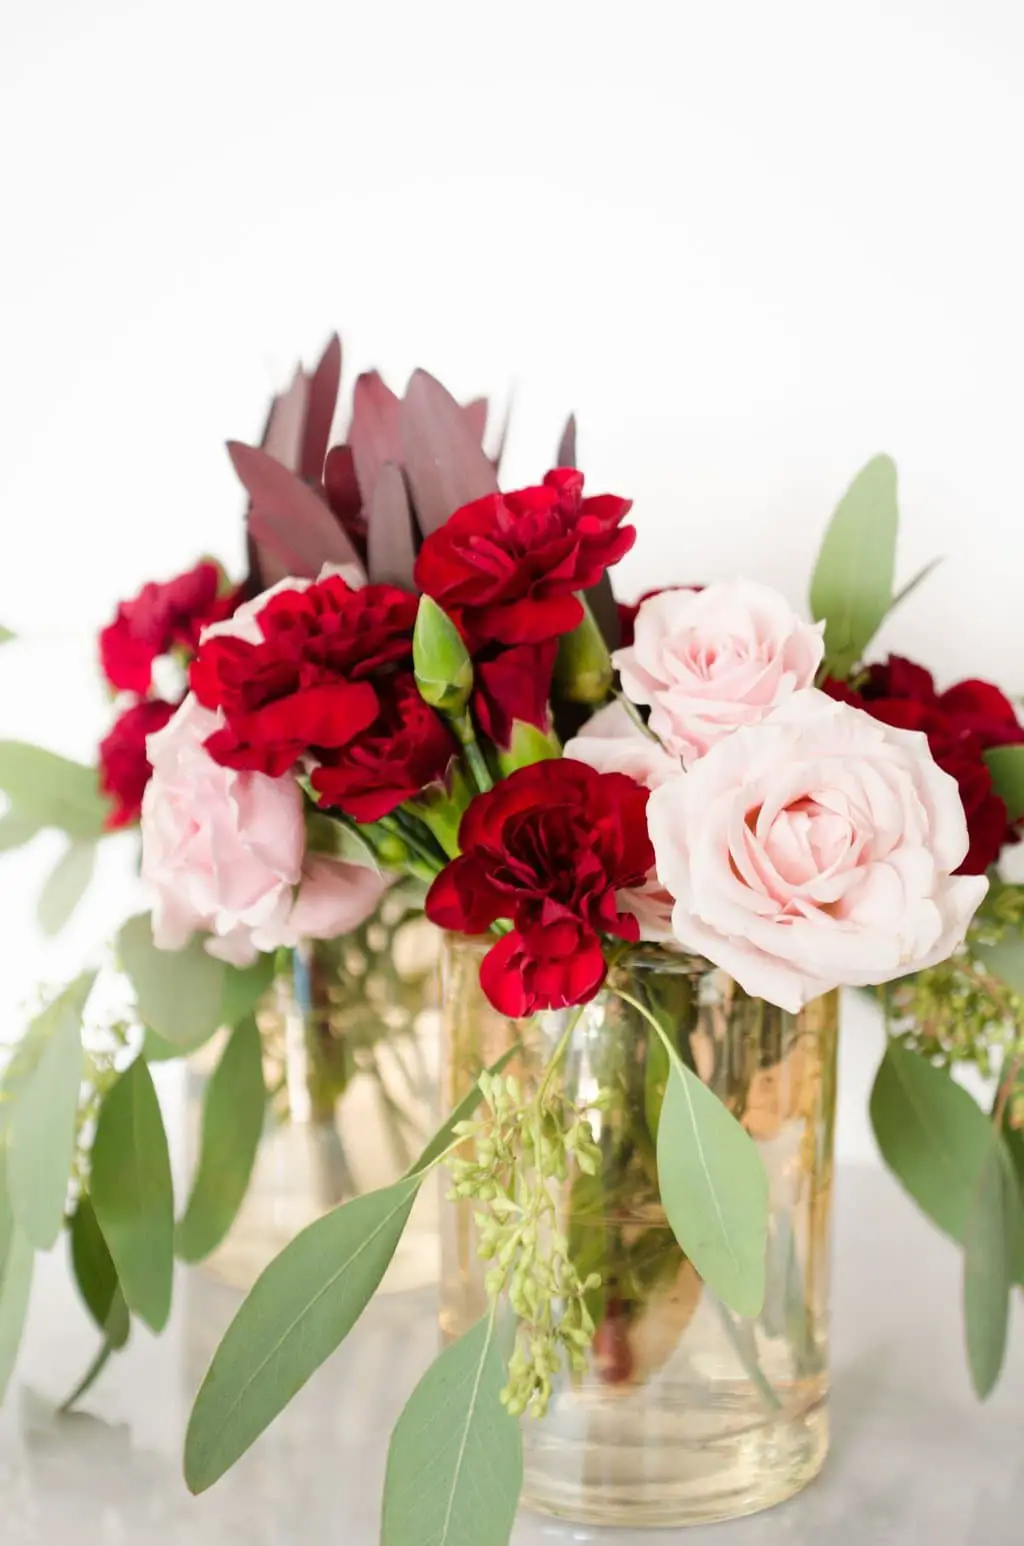 Pink roses, red carnations, leucadendron, and seeded eucalyptus via @thouswellblog